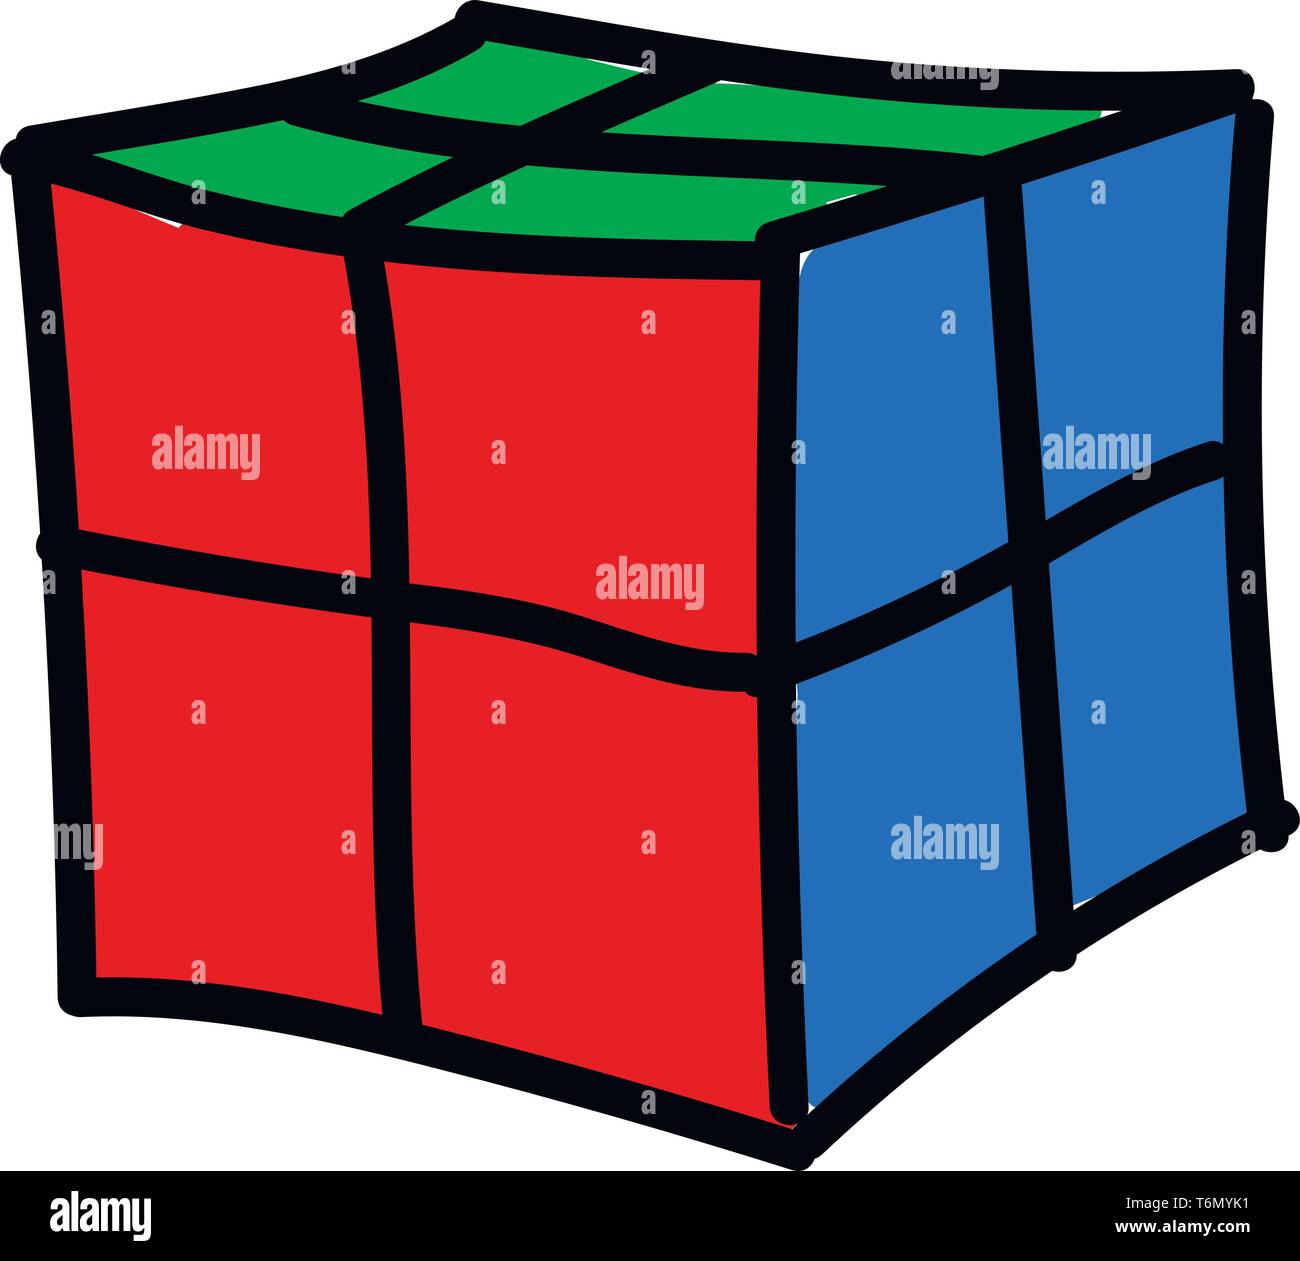 CUBE V - Cube 2X2 (With rounded corners and white background)